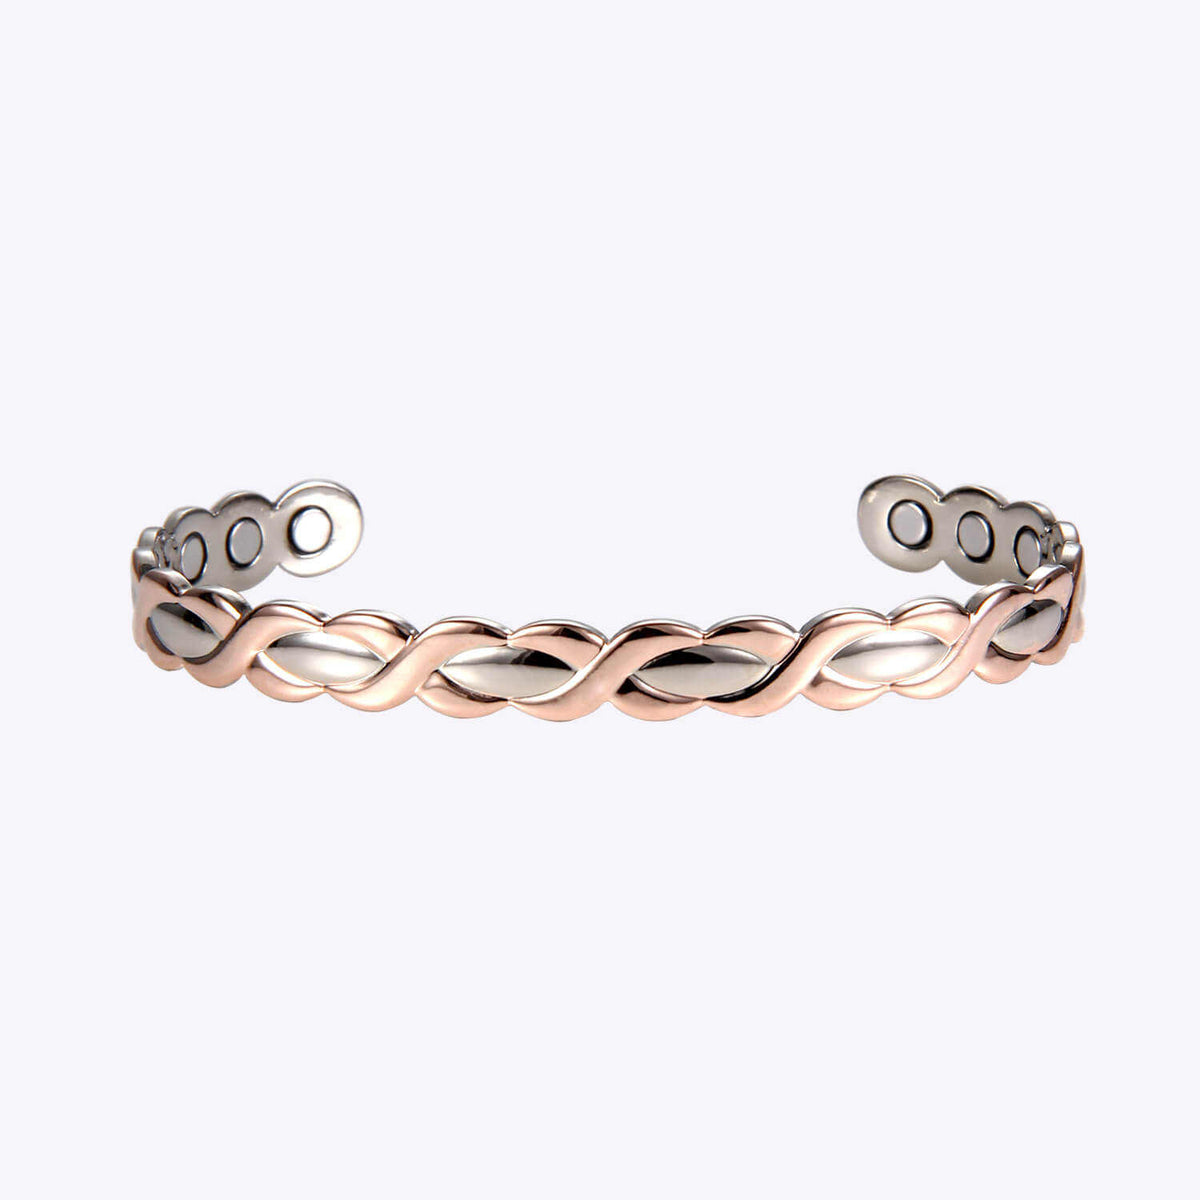 My Copper Irish Celtic Braid Two Tone Design Polished Copper Magnetic Therapy Bracelet